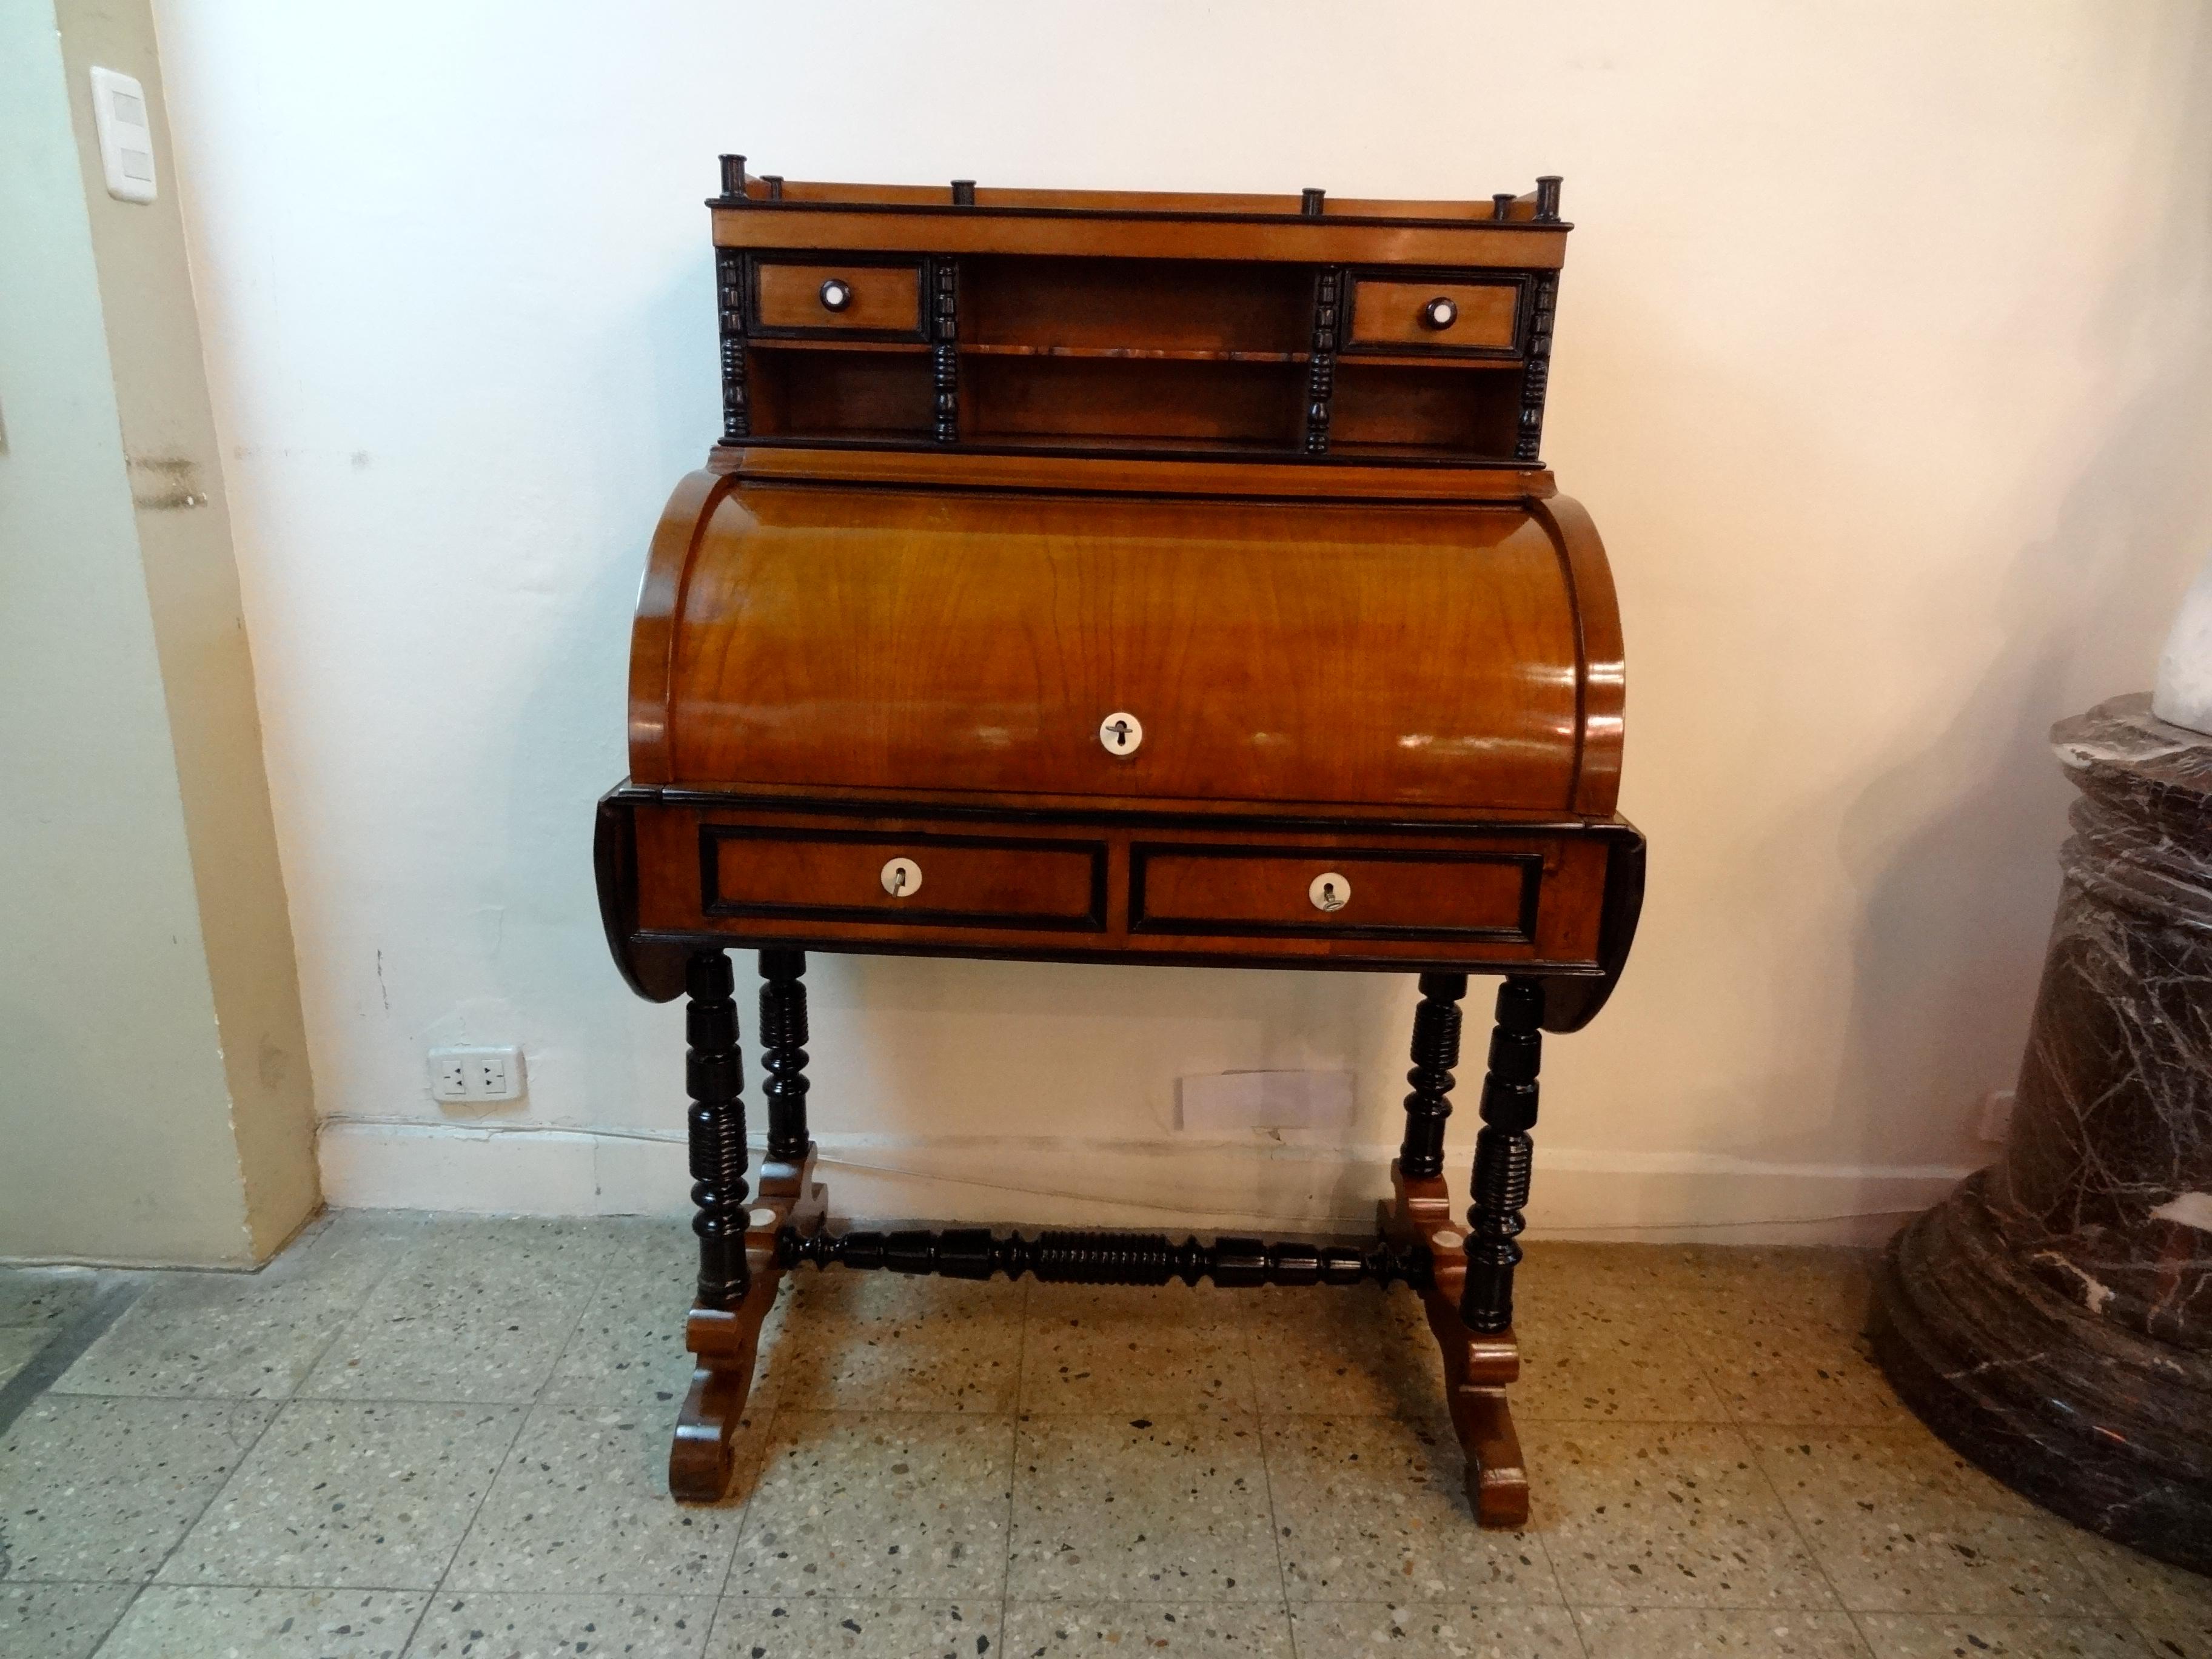 French desk style: Biedermeier
Year 1847
It is an elegant and sophisticated dream desk. 
If you are looking for desk lamp to match your desk, we have what you need.
If you have any questions we are at your disposal.
Pushing the button that reads